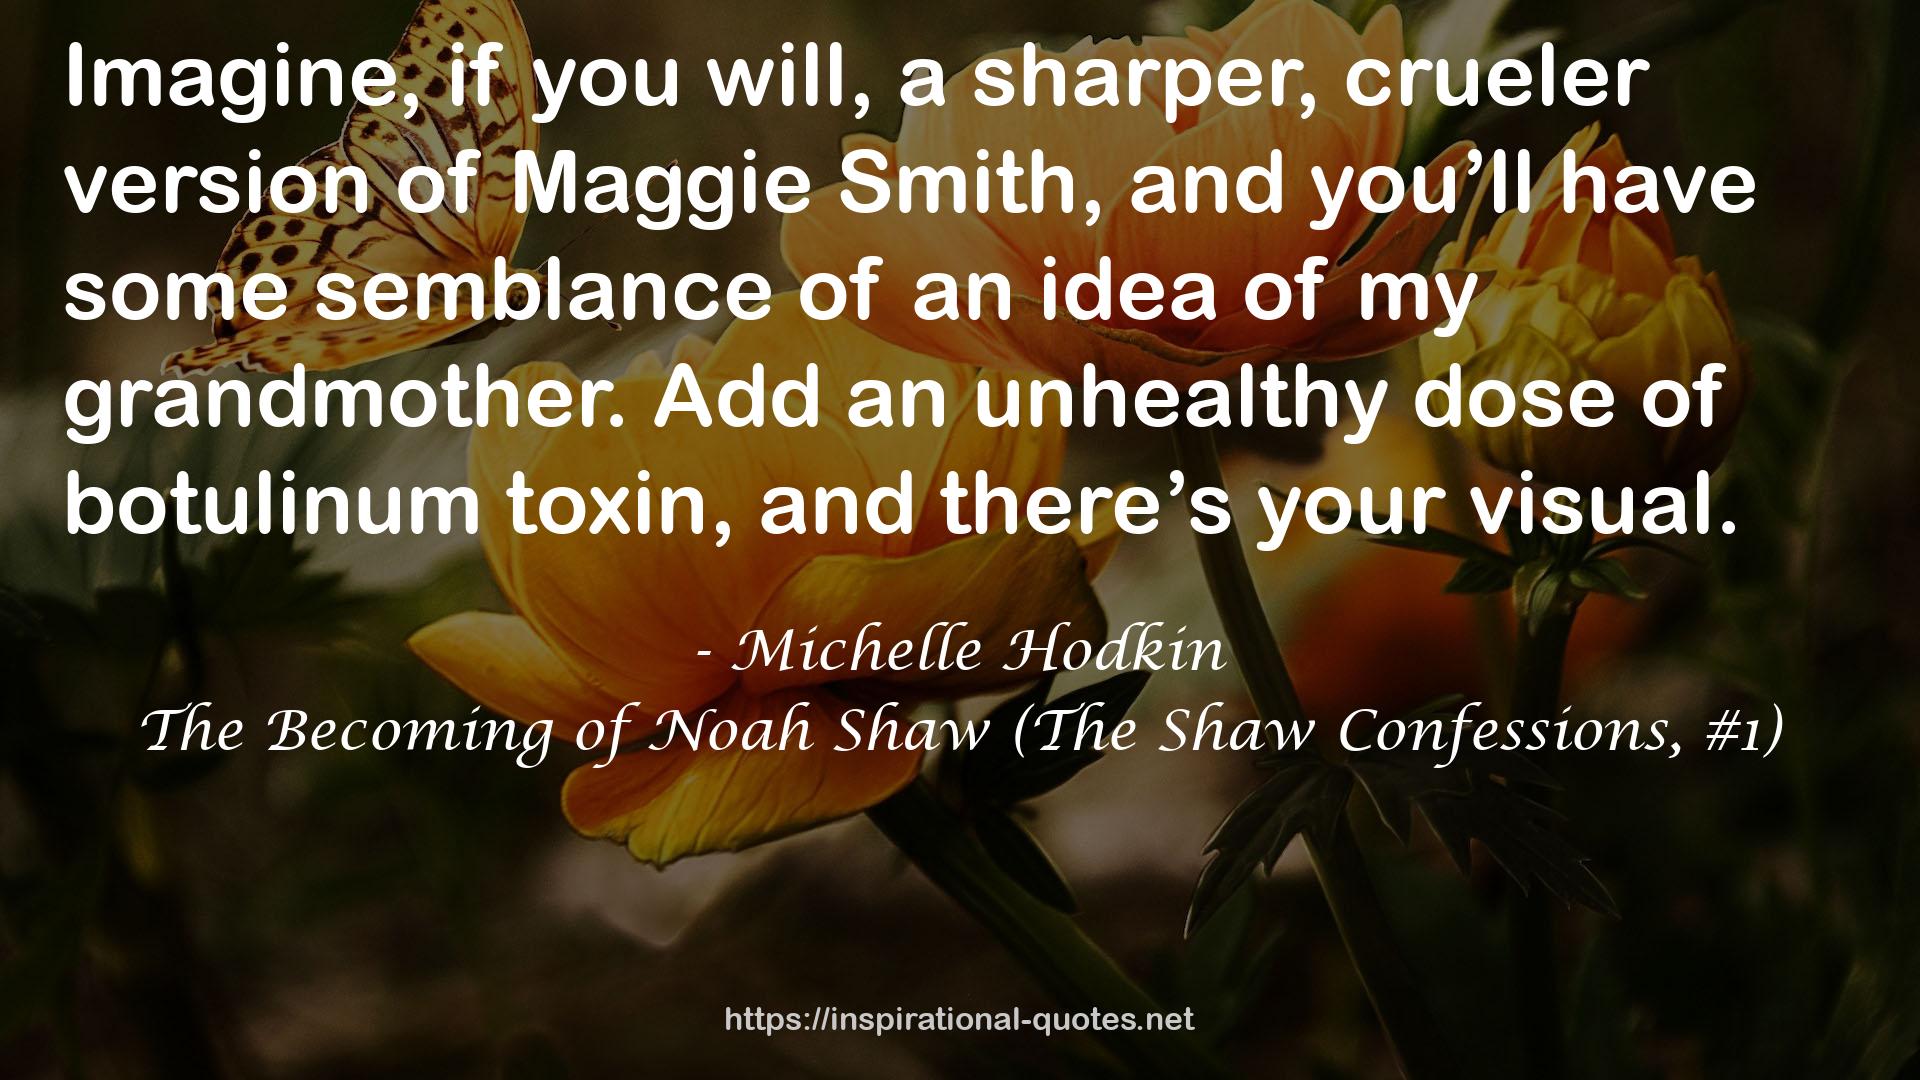 The Becoming of Noah Shaw (The Shaw Confessions, #1) QUOTES